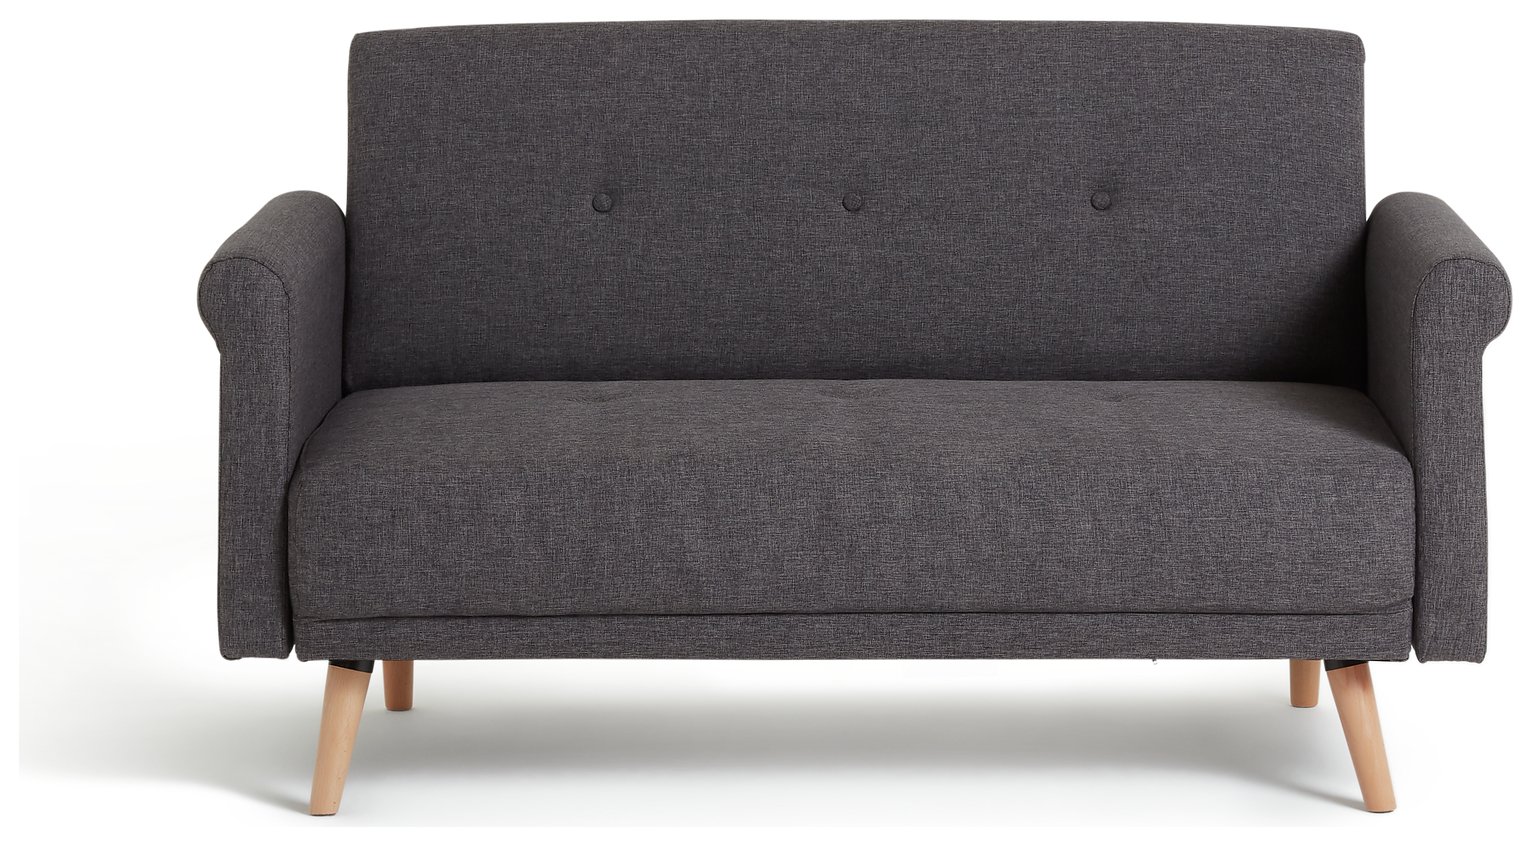 Argos Home Evie 2 Seater Fabric Sofa in a Box Review